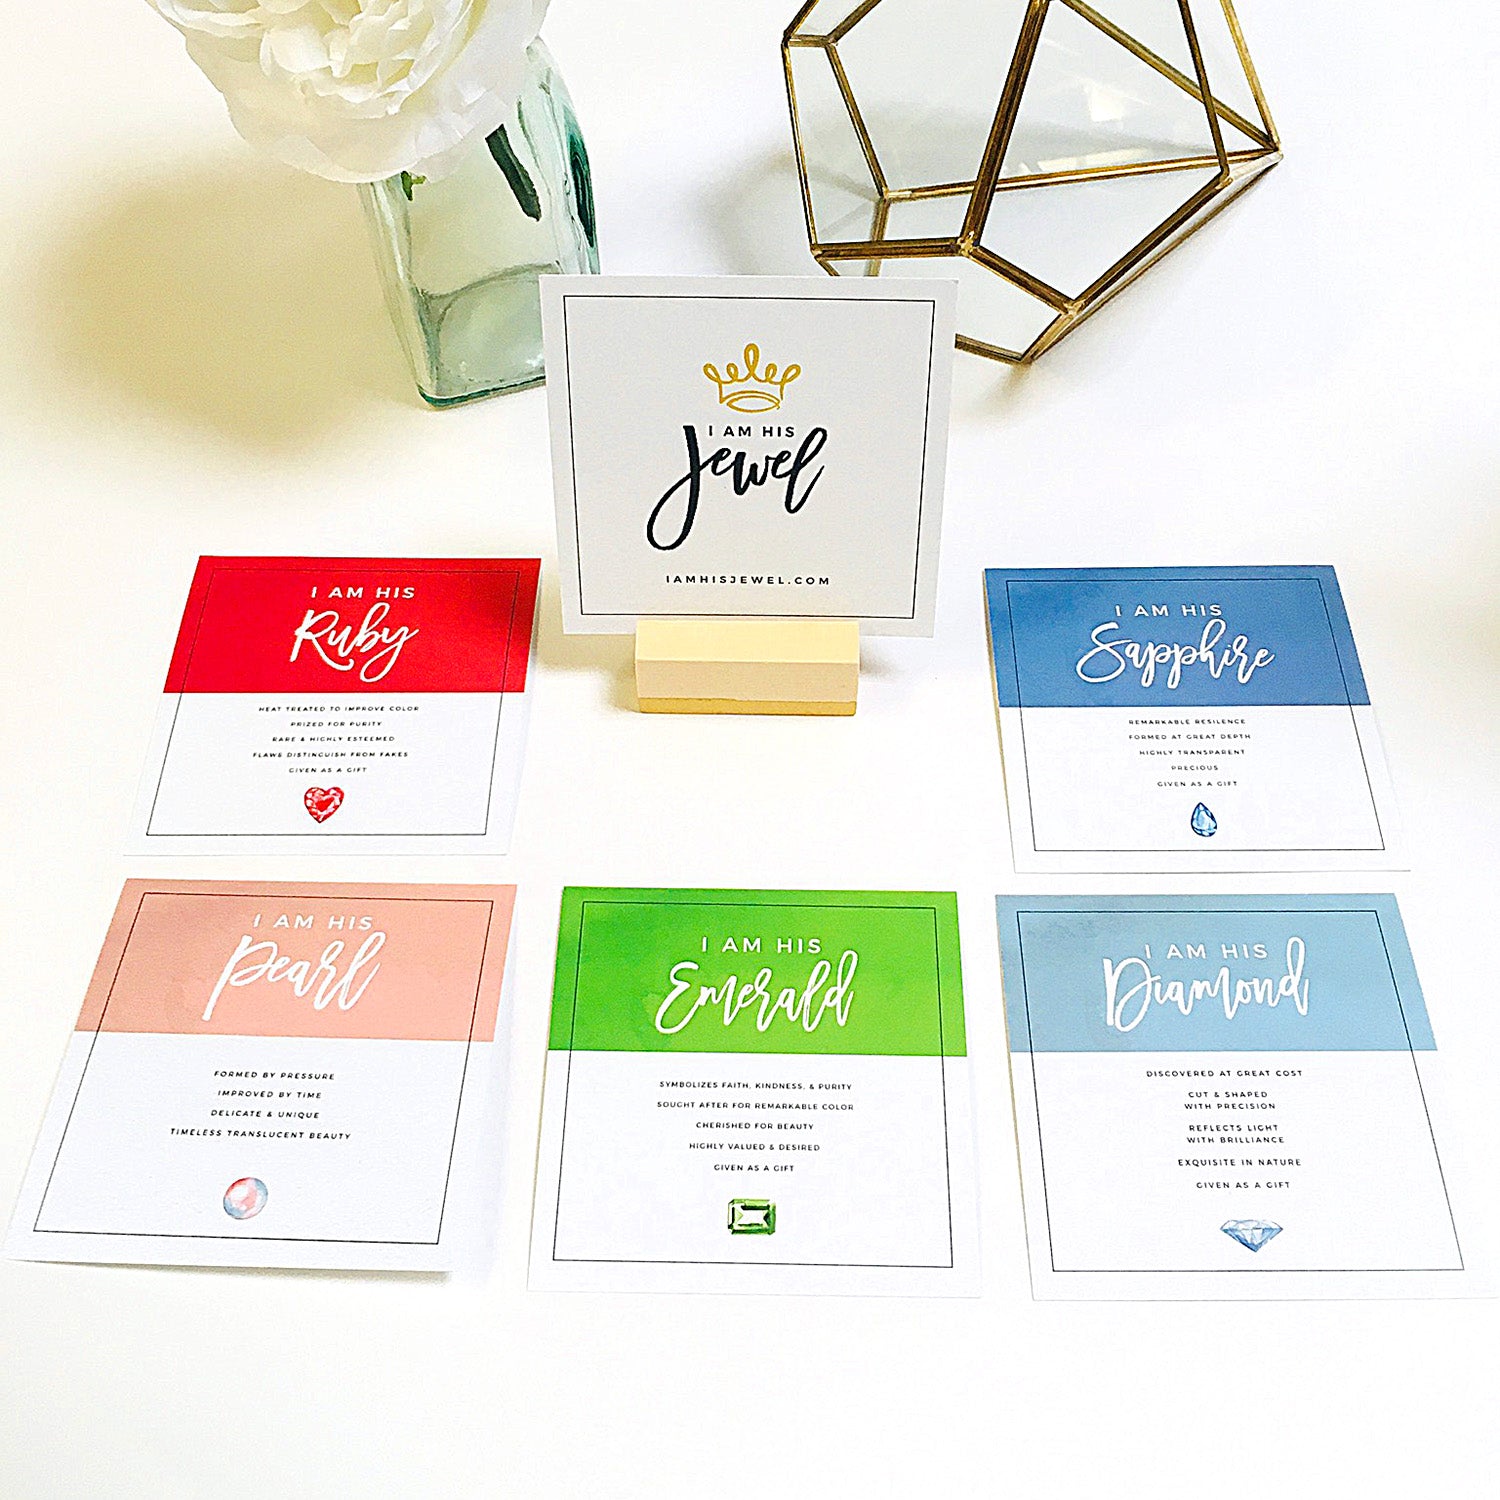 CARD SET: CLASSIC JEWEL INSPIRATIONS. CARDS & STAND